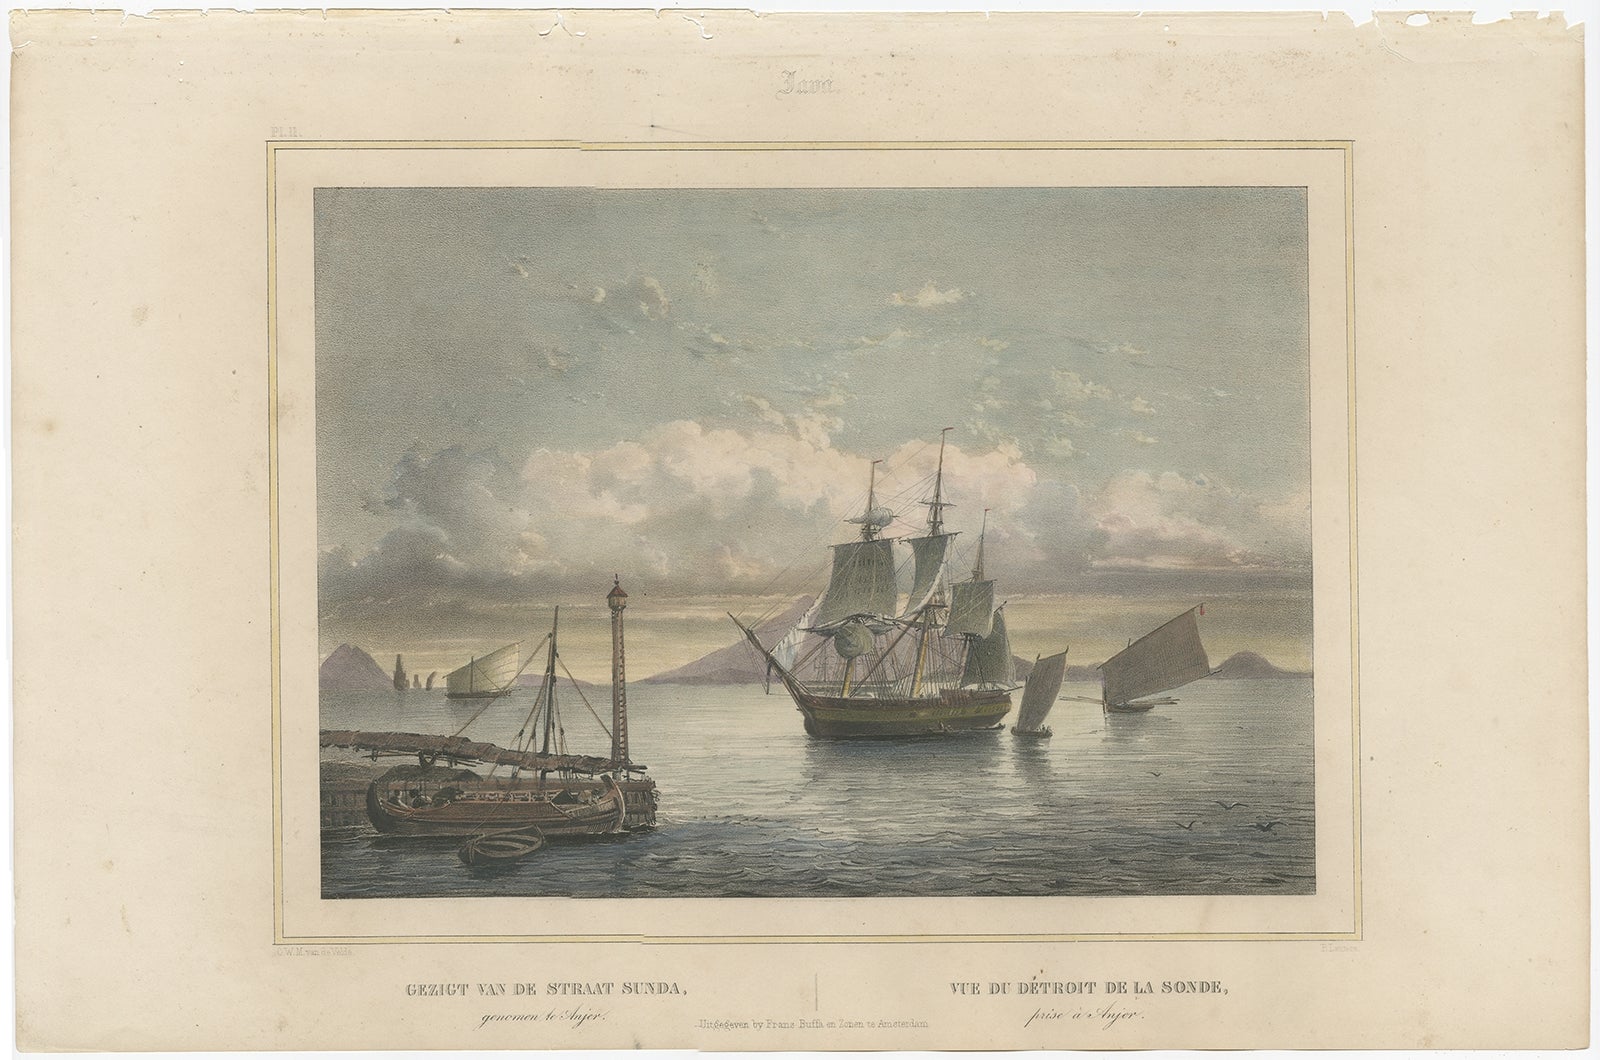 Antique print titled 'Gezigt van de Straat Sunda - Vue du Détroit de la Sonde'. 

Old print with a view of the Sunda straits with ships as seen from Anjer / Anyer on the Island of Java, Indonesia. Originates from 'Gezigten uit Neerlands Indie,